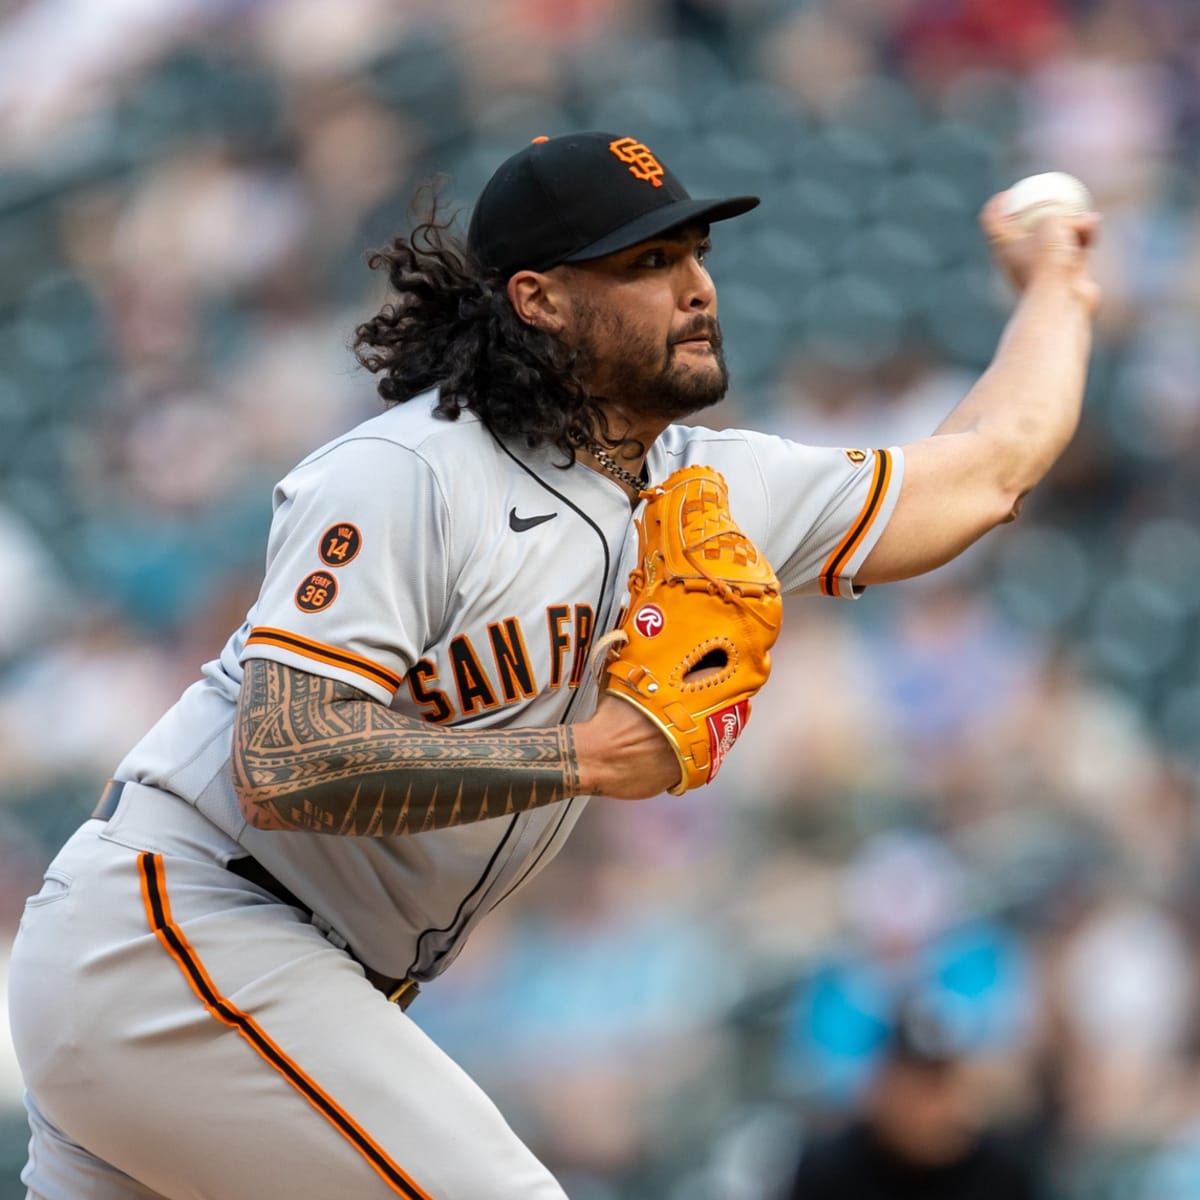 San Francisco Giants Pitcher Does Something Not Done in Baseball For More  than 20 Years - Fastball